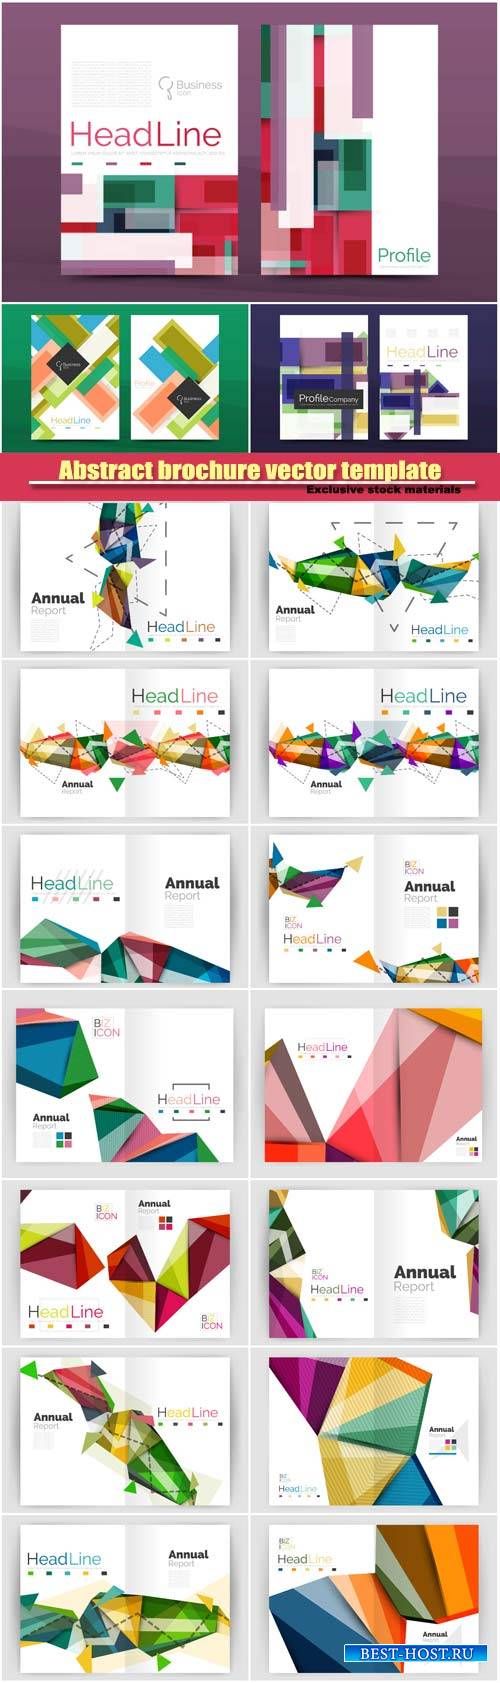 Abstract vector geometric design business brochure cover